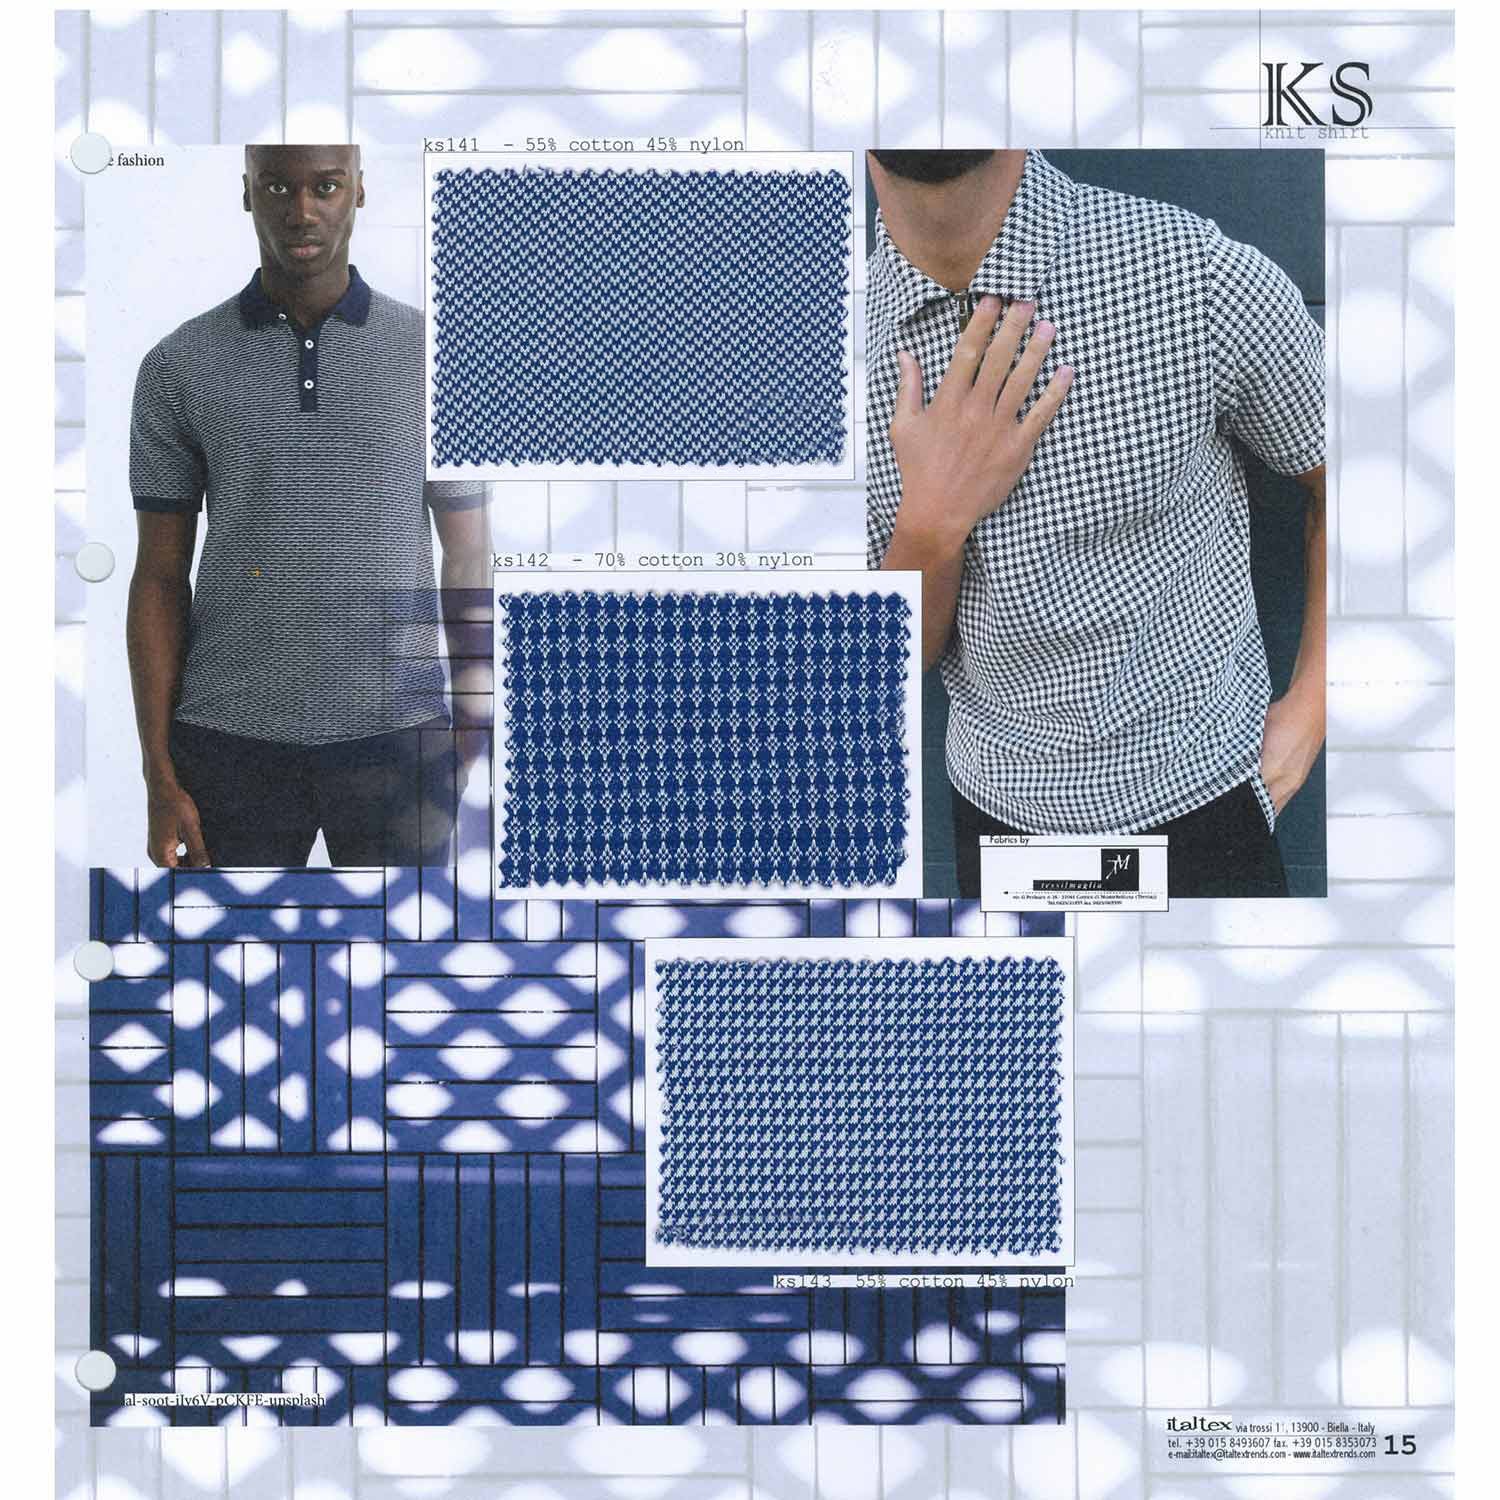 Three fabric swatches in tiny white and blue effects for knit polo shirts SS25